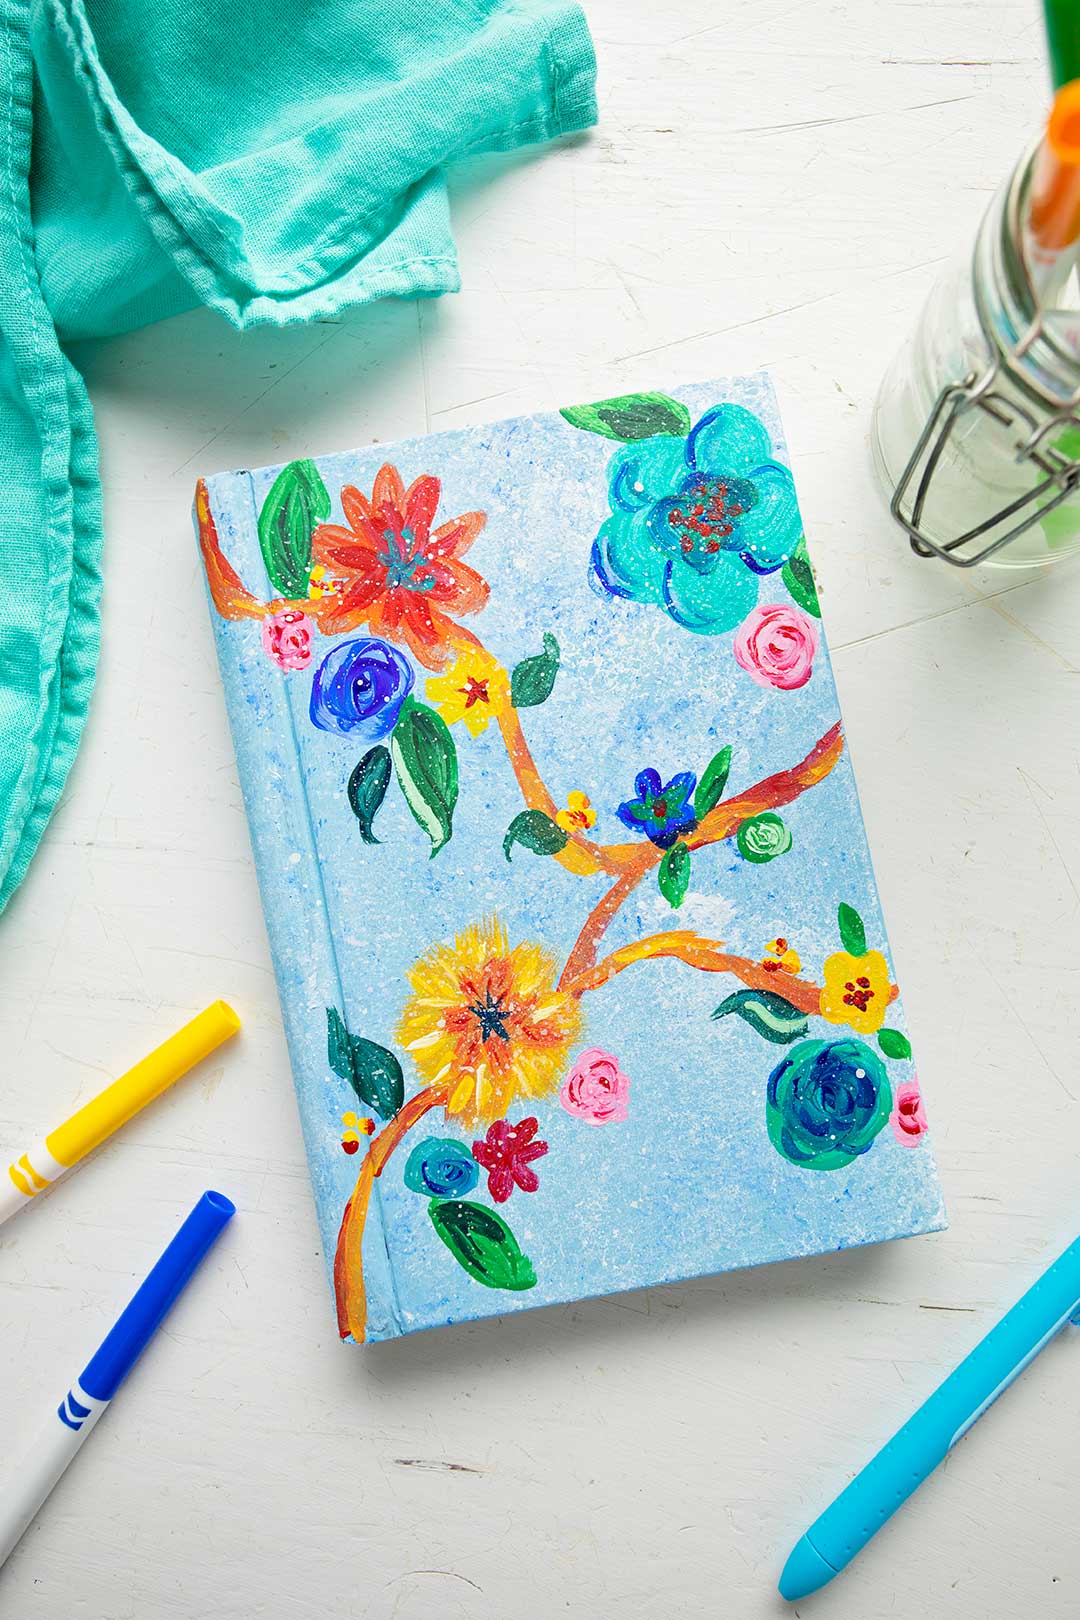 https://welcometonanas.com/wp-content/uploads/2022/04/Welcome-to-Nanas-DIY-Painted-Book-Covers-for-Decor-Or-Use-3.jpg